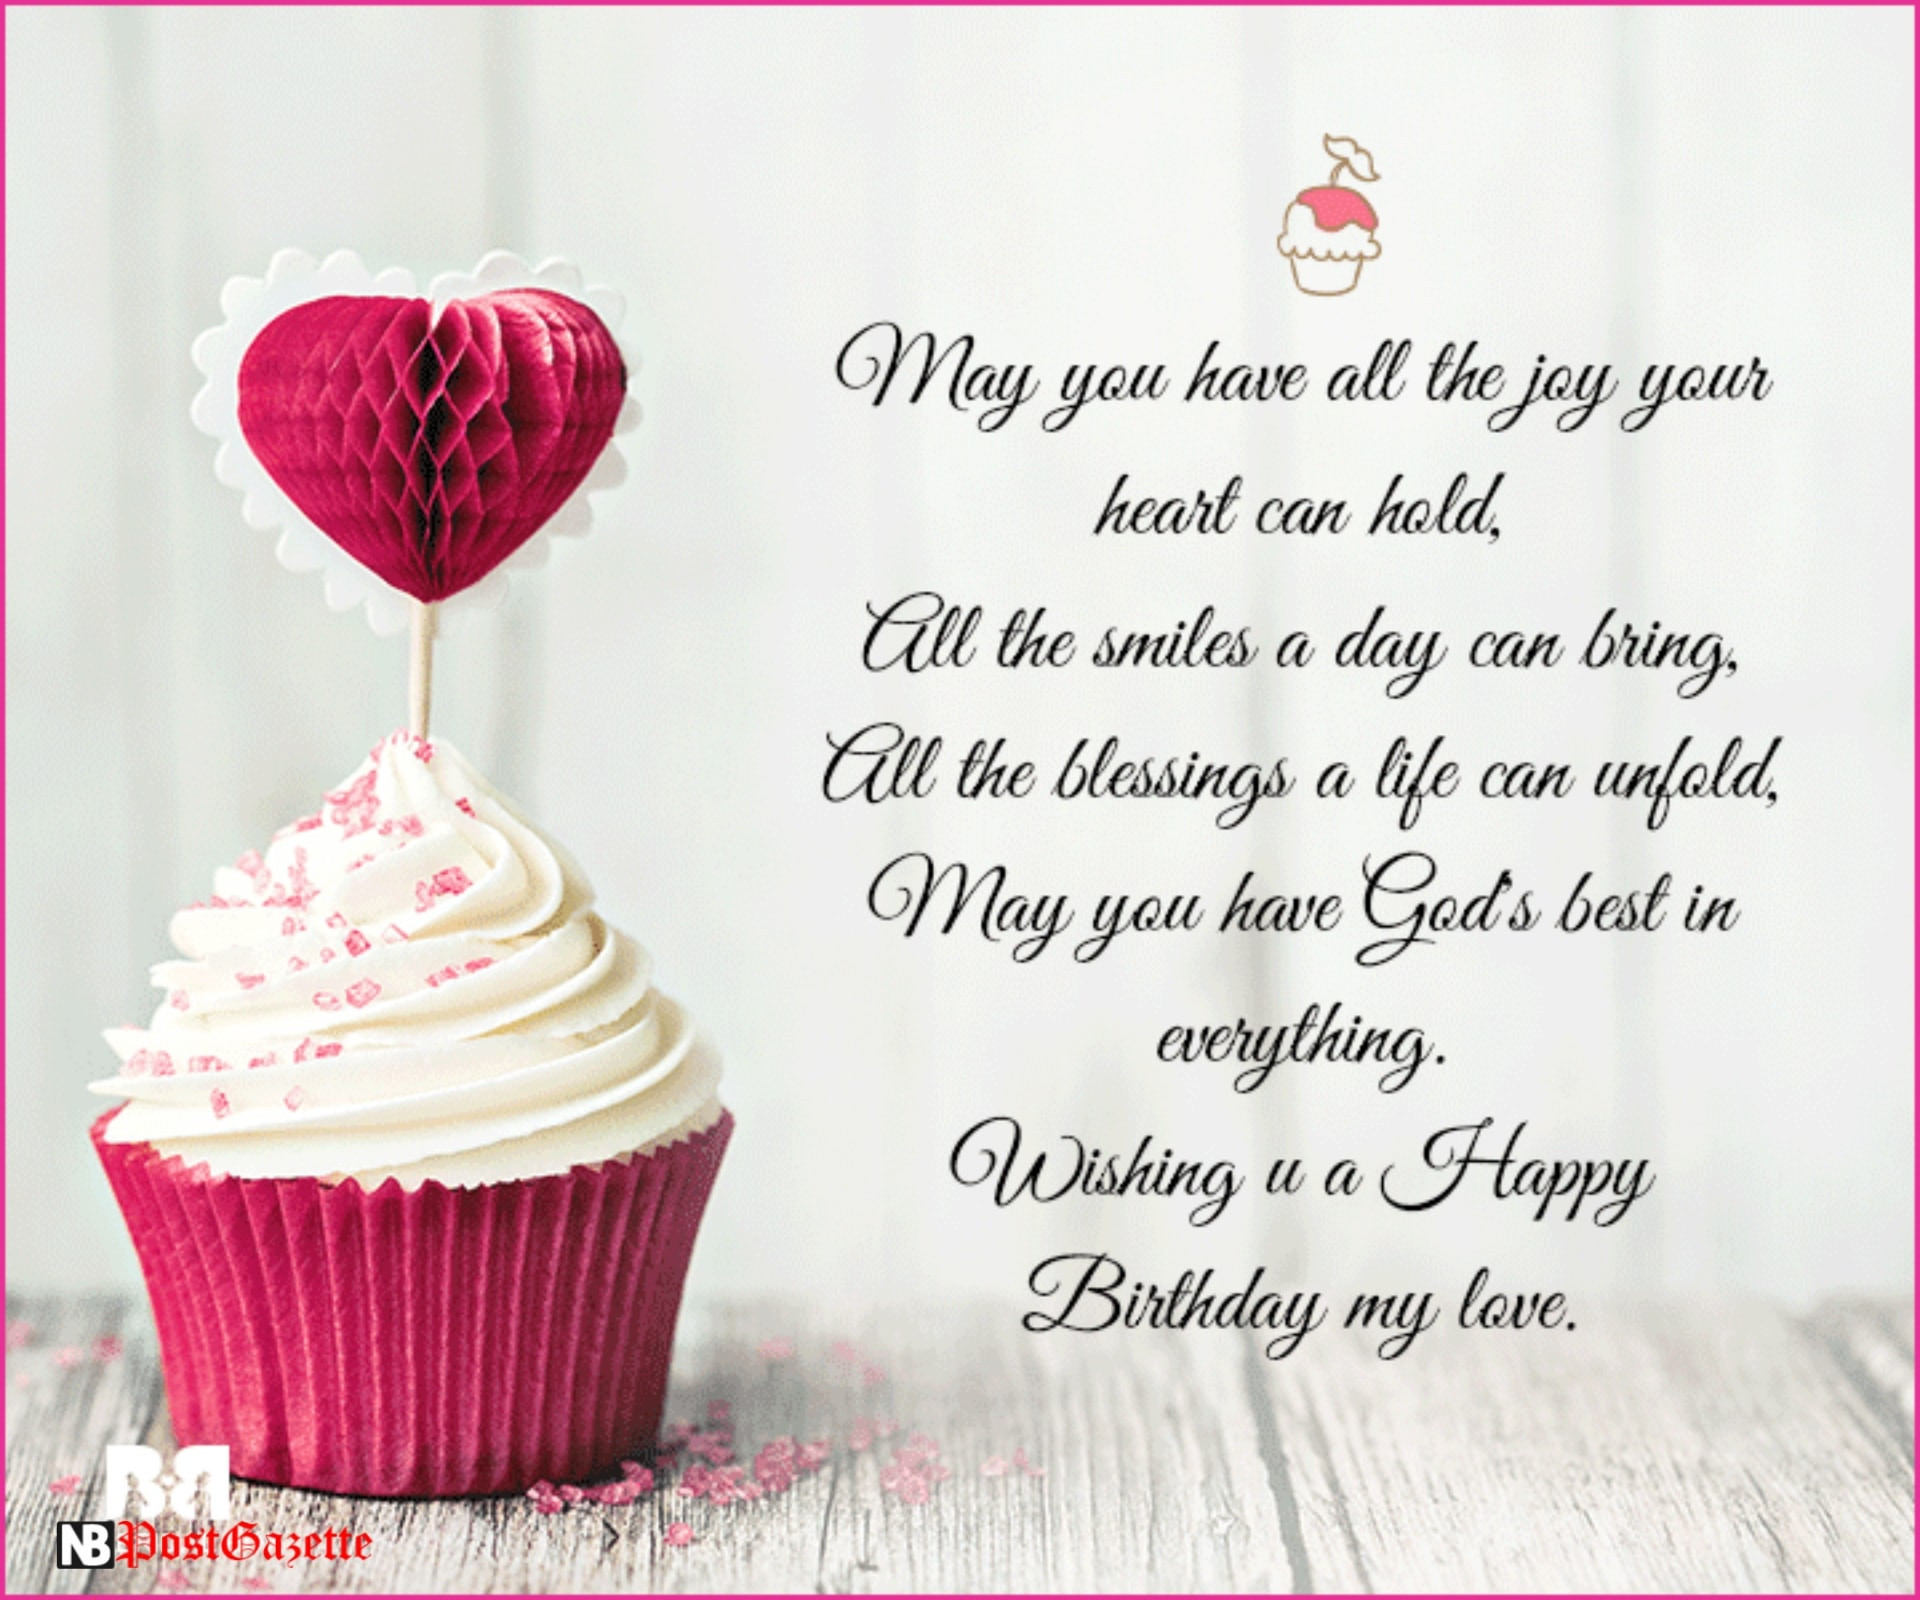 Happy Birthday Best Wishes
 Top Best Happy Birthday Wishes SMS Quotes & Text Messages